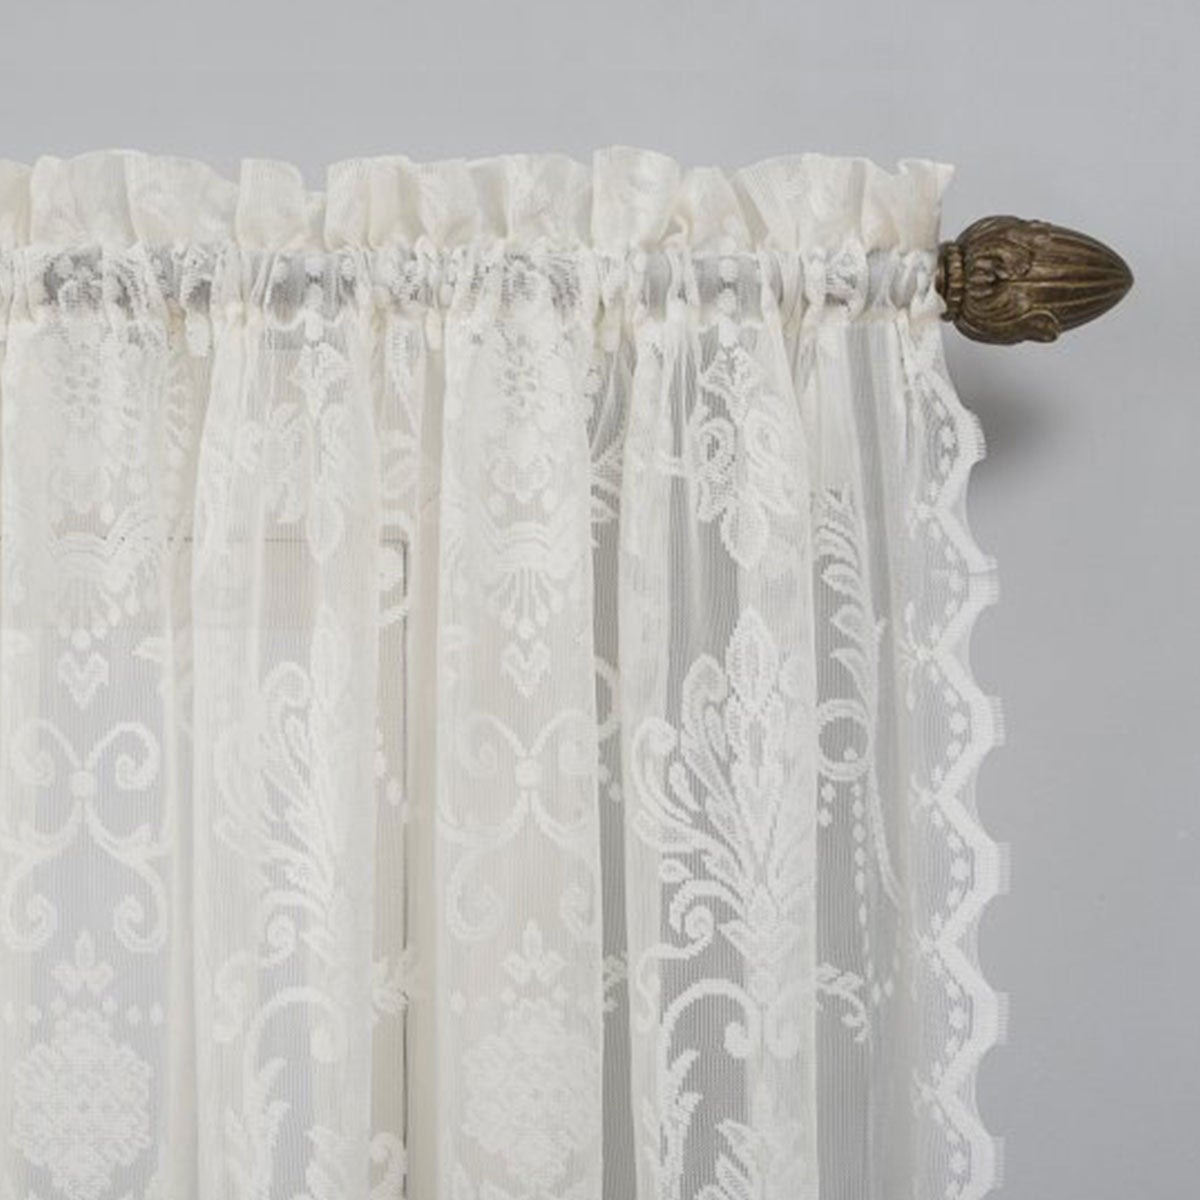 With These Dramatic Drapes, Curtains Will No Longer Be an Afterthought